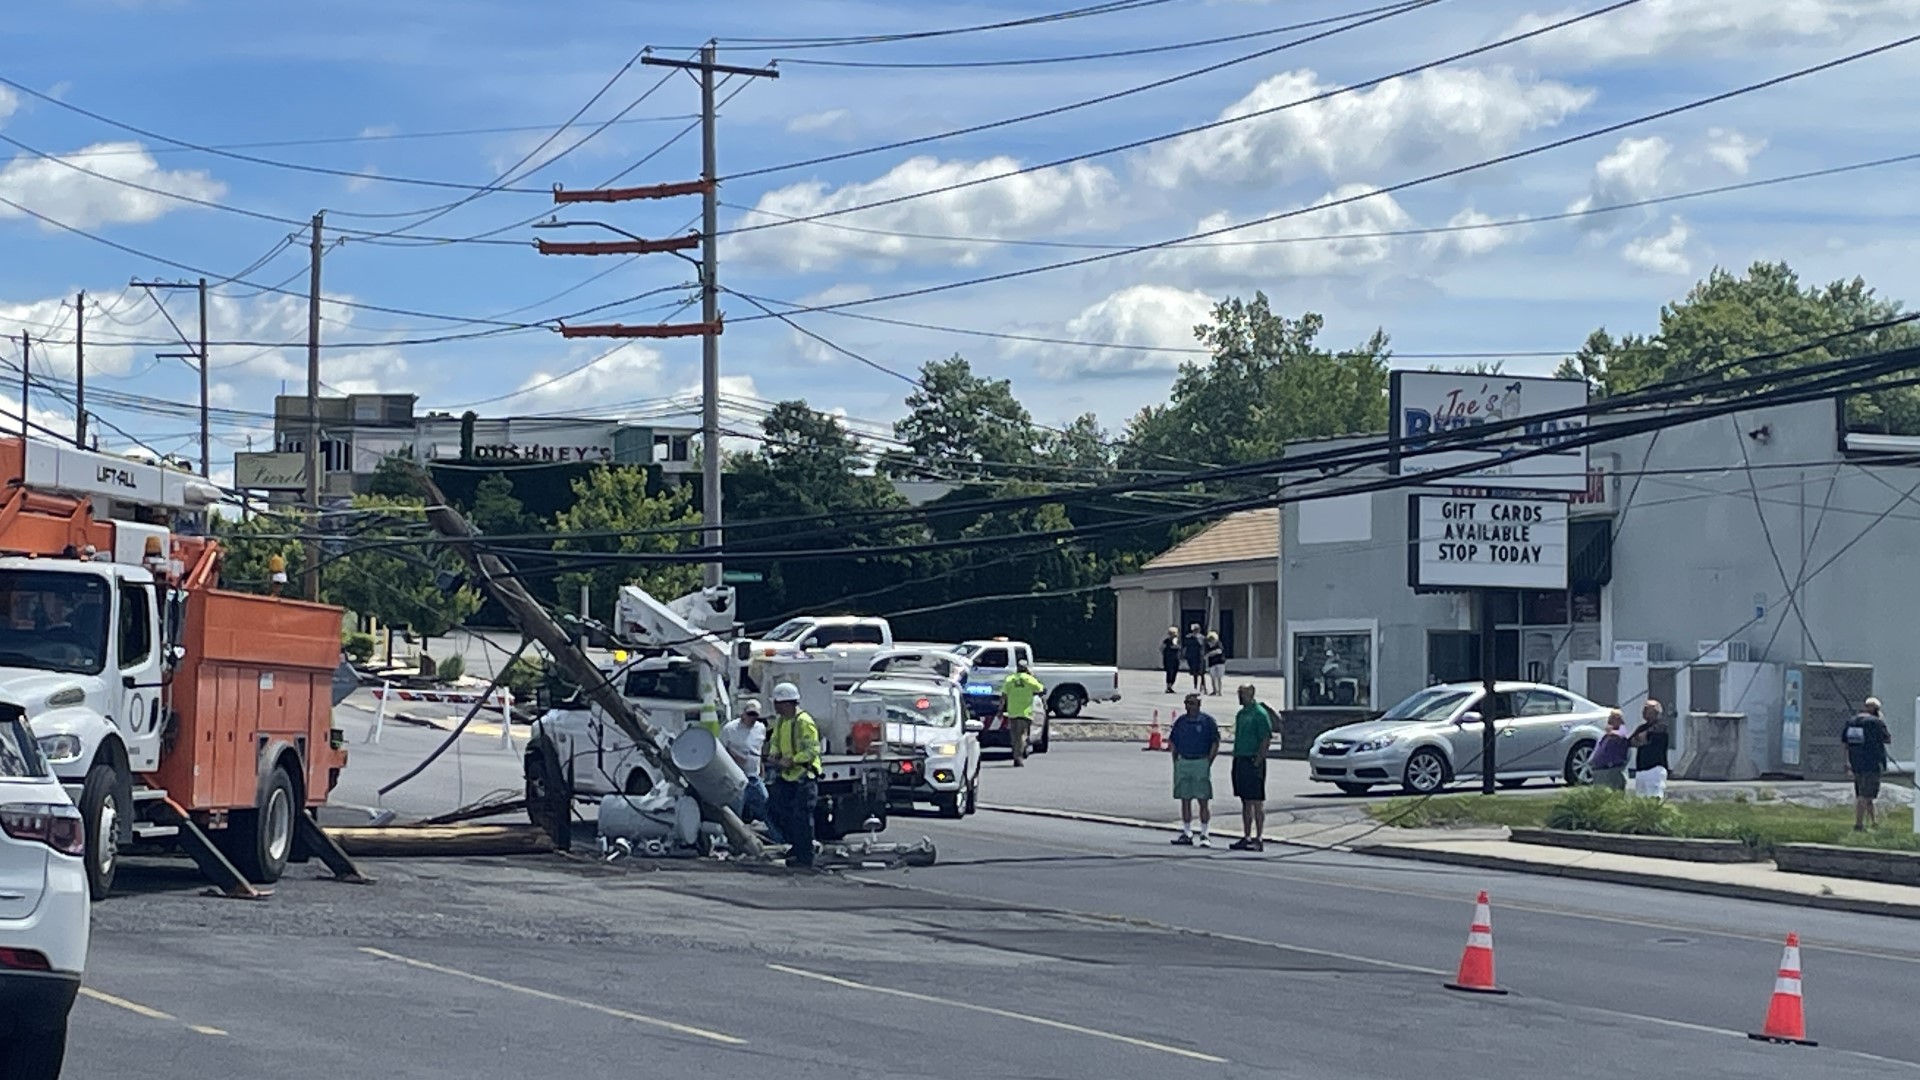 A tractor-trailer crashed into a pole in Lackawanna County, knocking out power in the area.